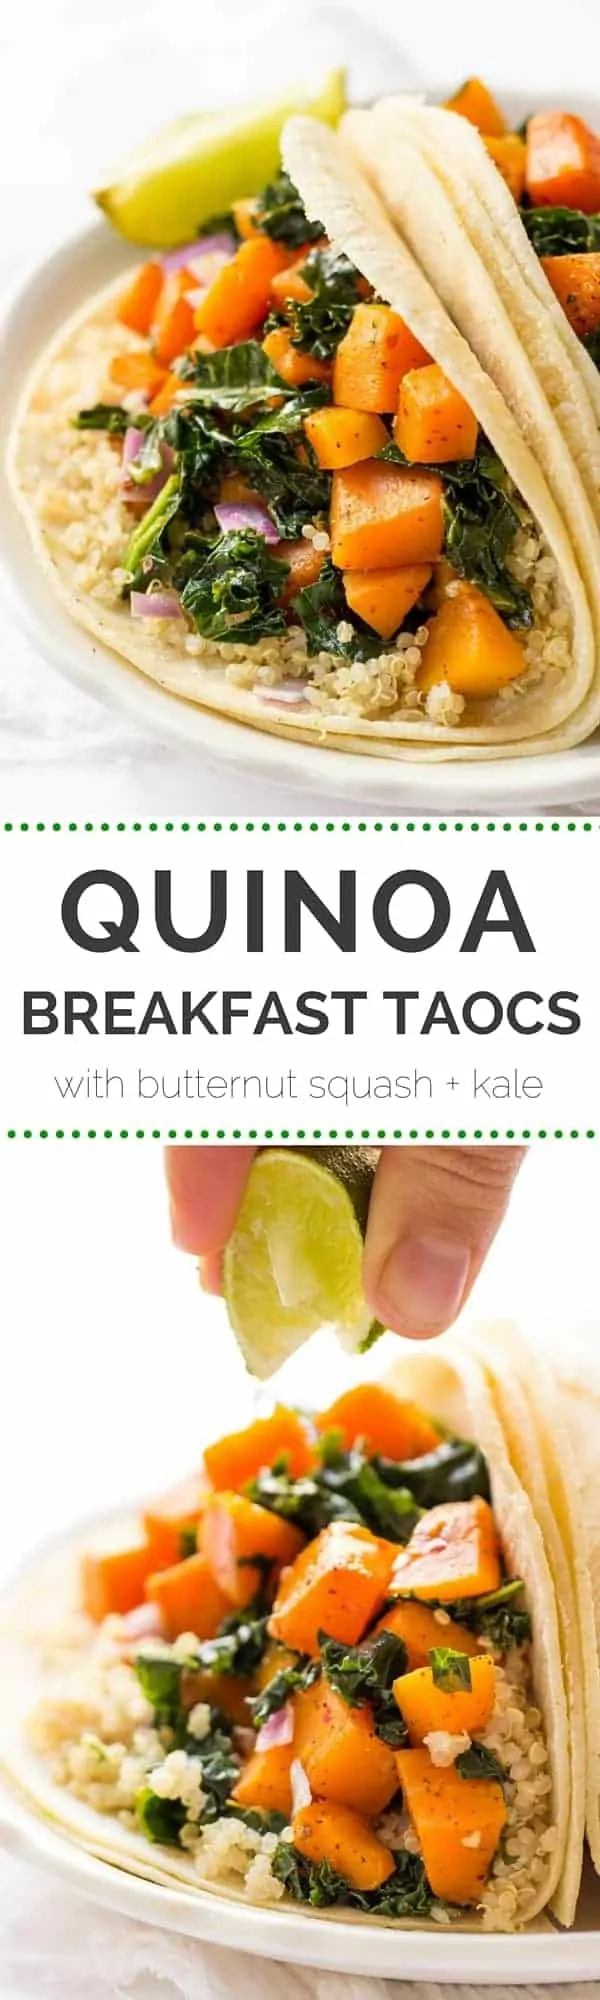 VEGAN! Quinoa Breakfast Tacos with a savory butternut squash + kale filling - simple, flavorful and detox-friendly!